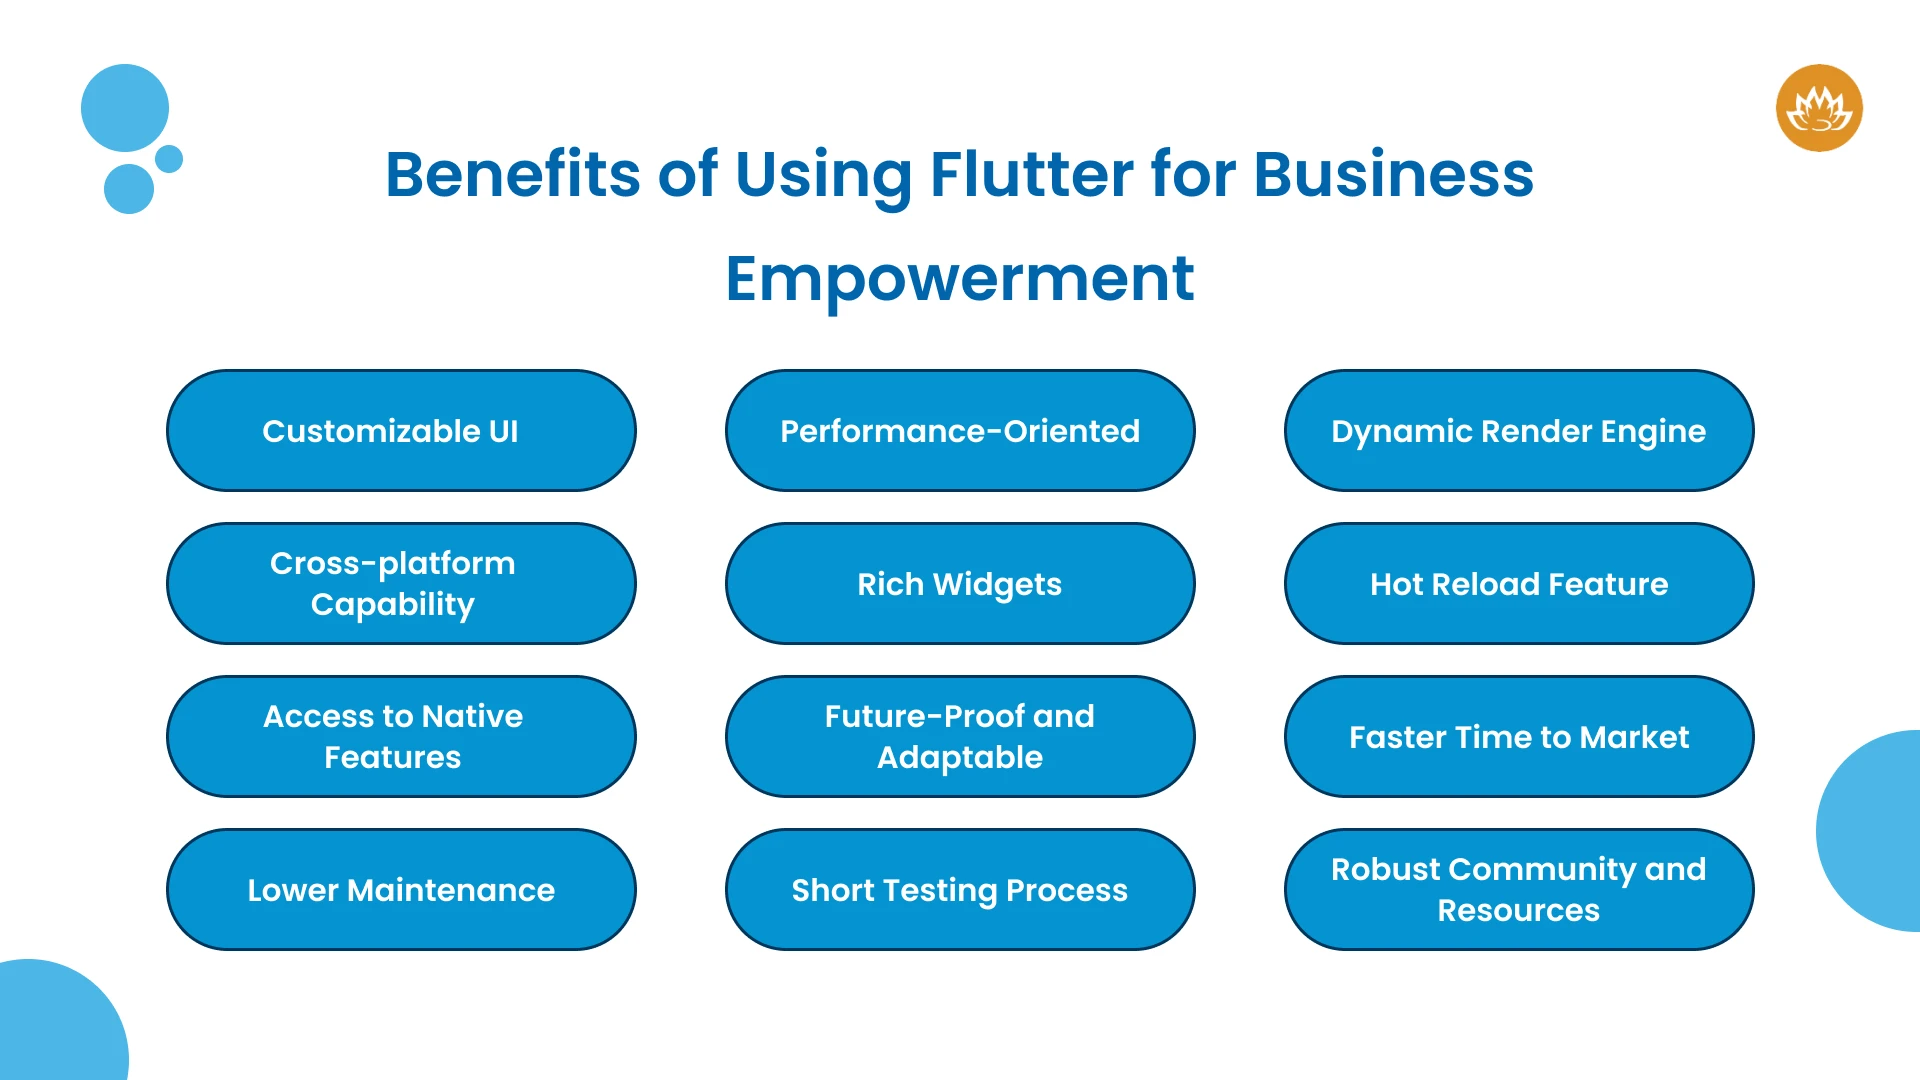 Benefits of Using Flutter for Business Empowerment